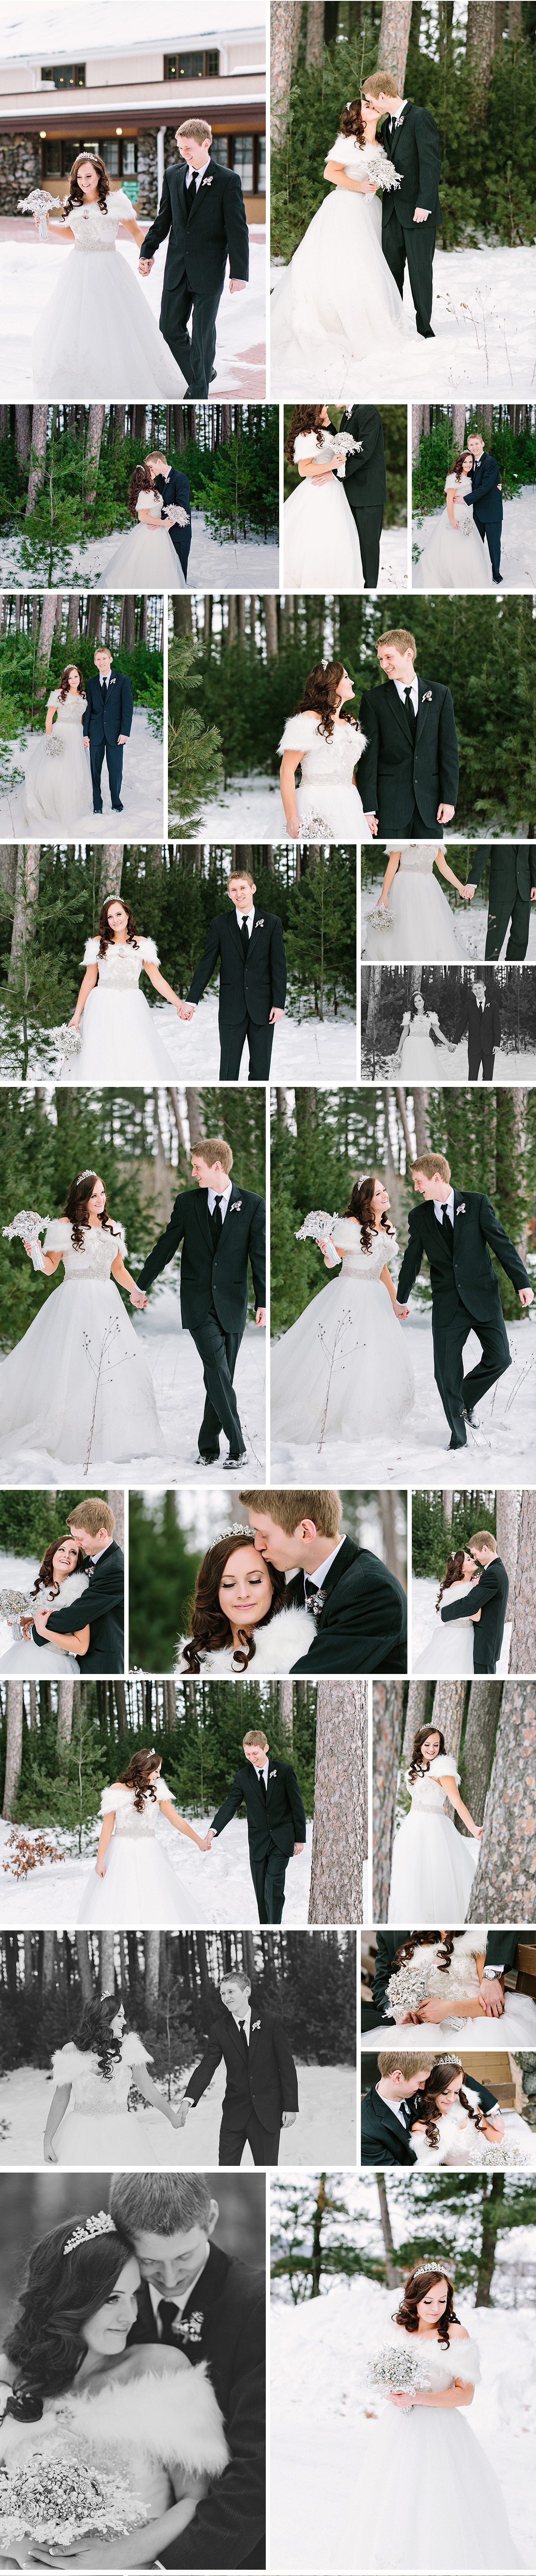 Winter Wedding Photos of couples in the snow 